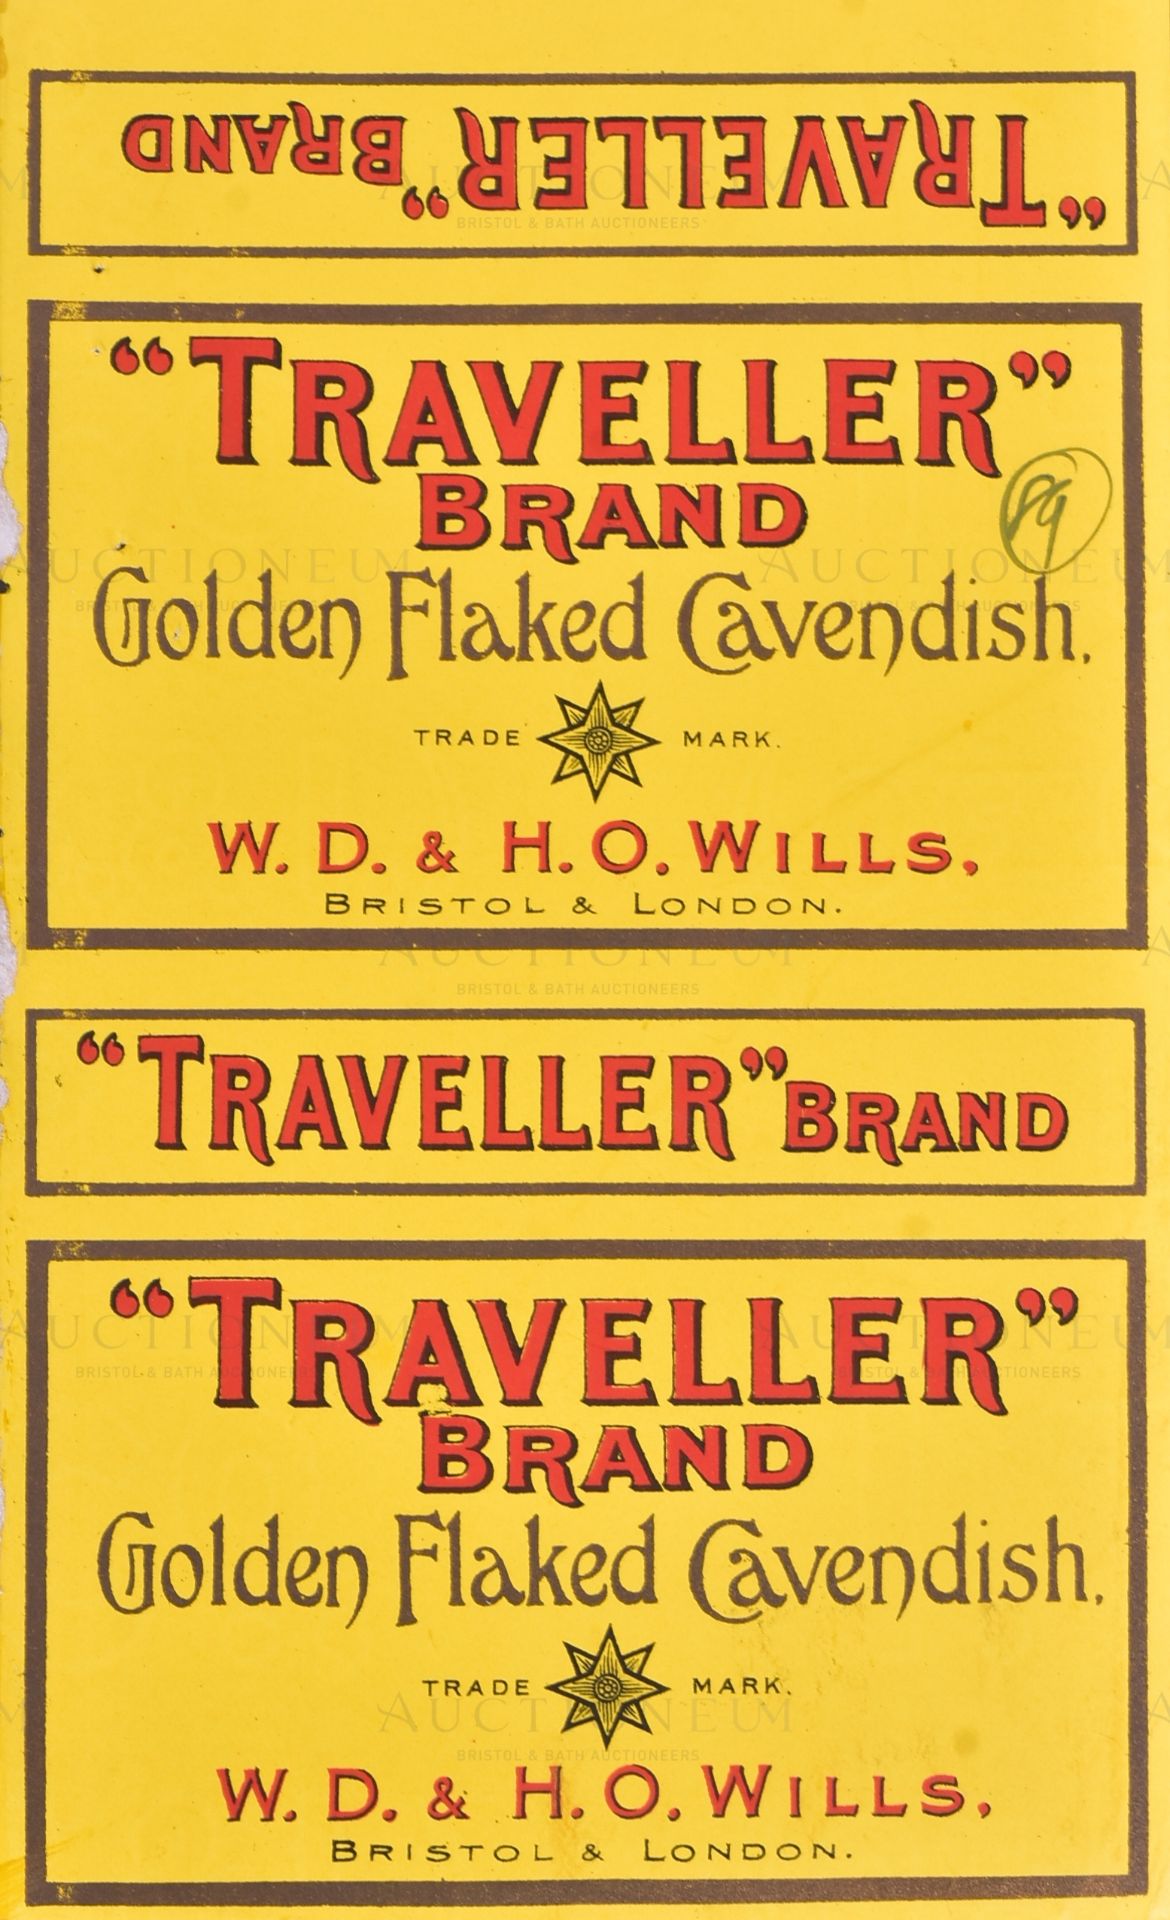 MARDON, SON & HALL - EARLY 20TH CENTURY CIGARETTE PACKET DESIGNS - Image 4 of 7